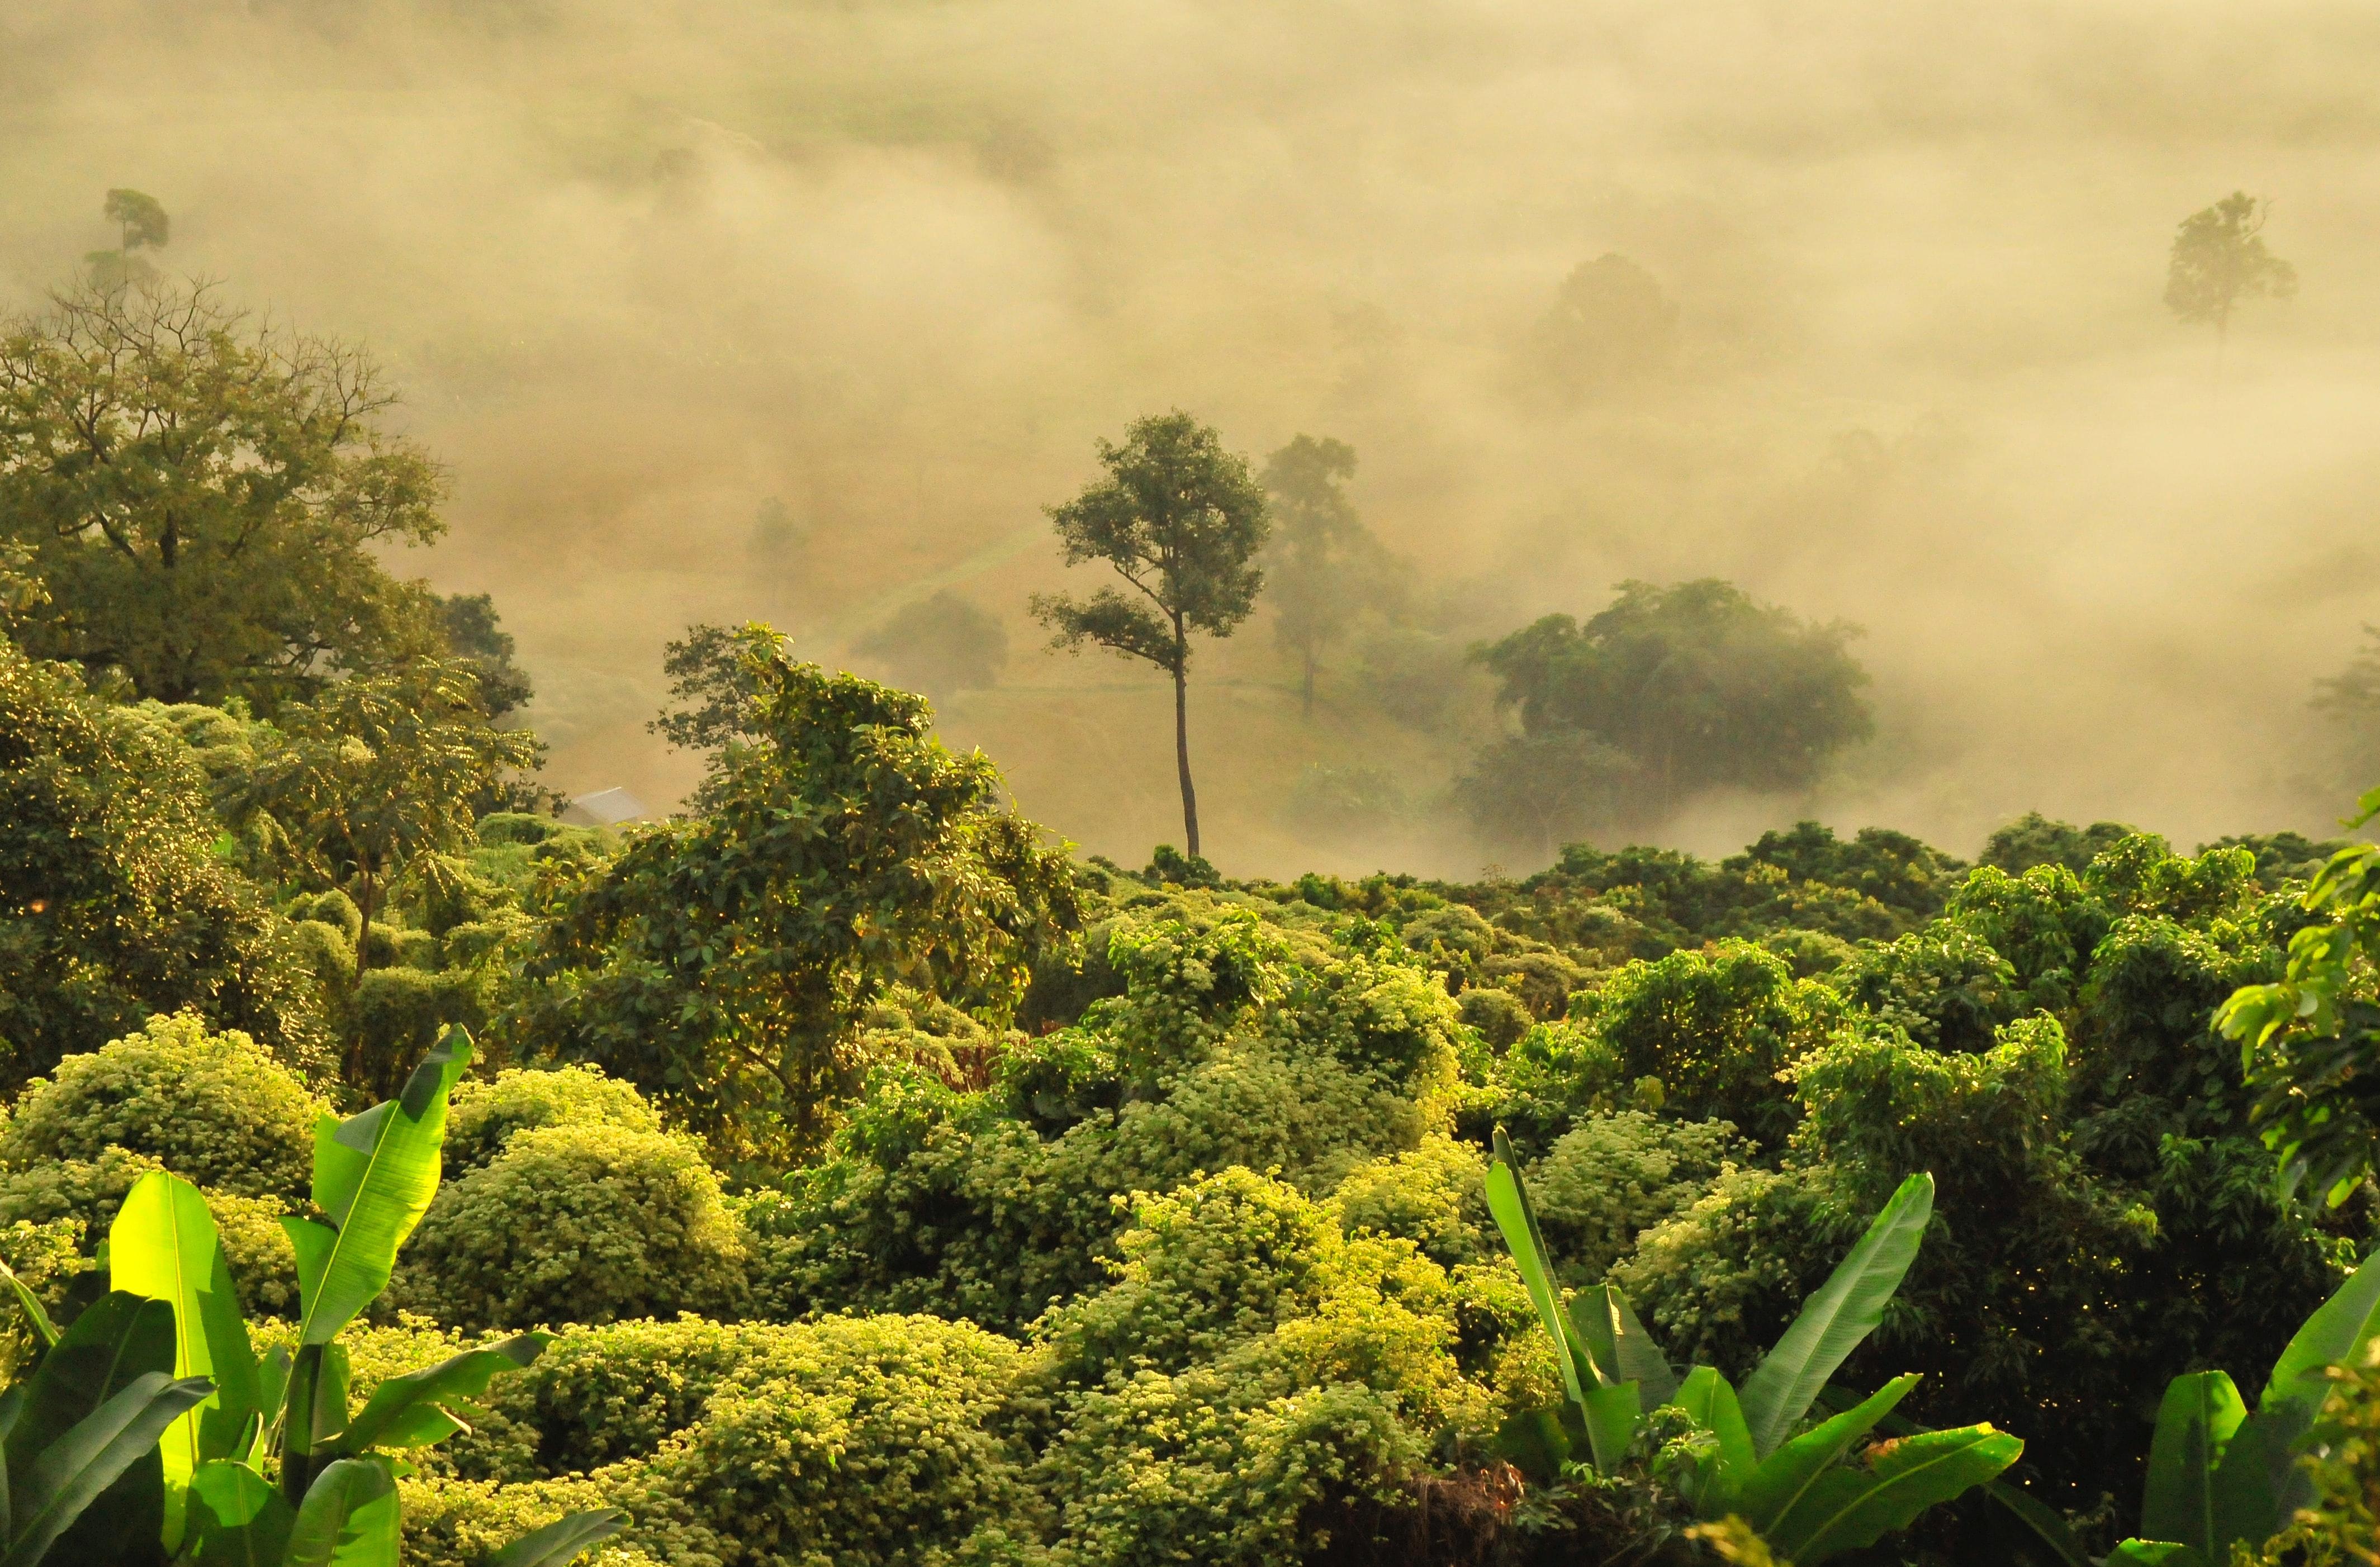 A tropical rainforest, photographed from above, with mist and low light.